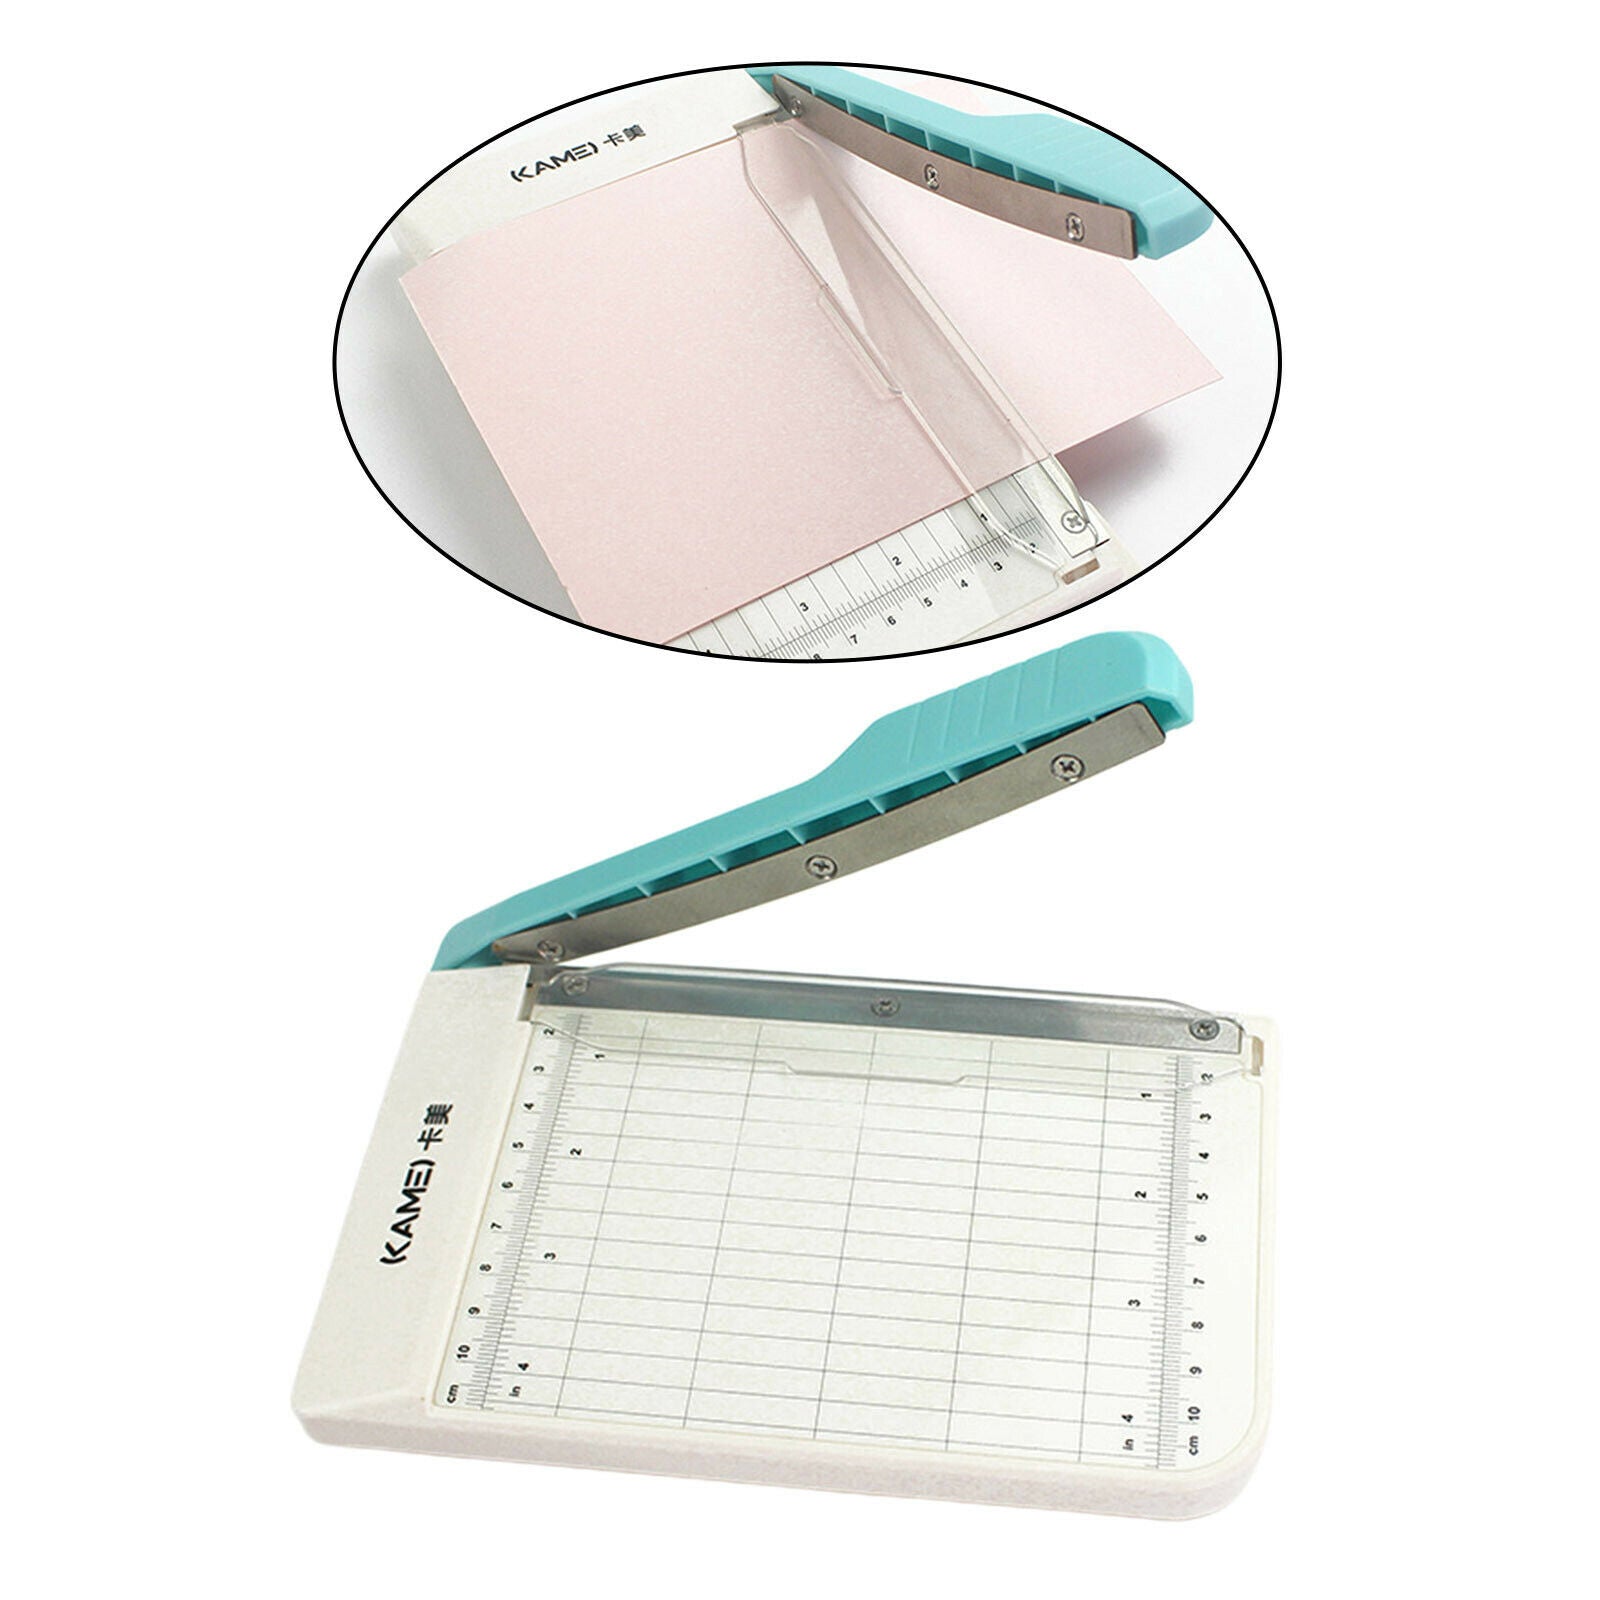 Paper Trimmer Guillotine 10 Sheet Capacity Photo Cutter for Card Home Office